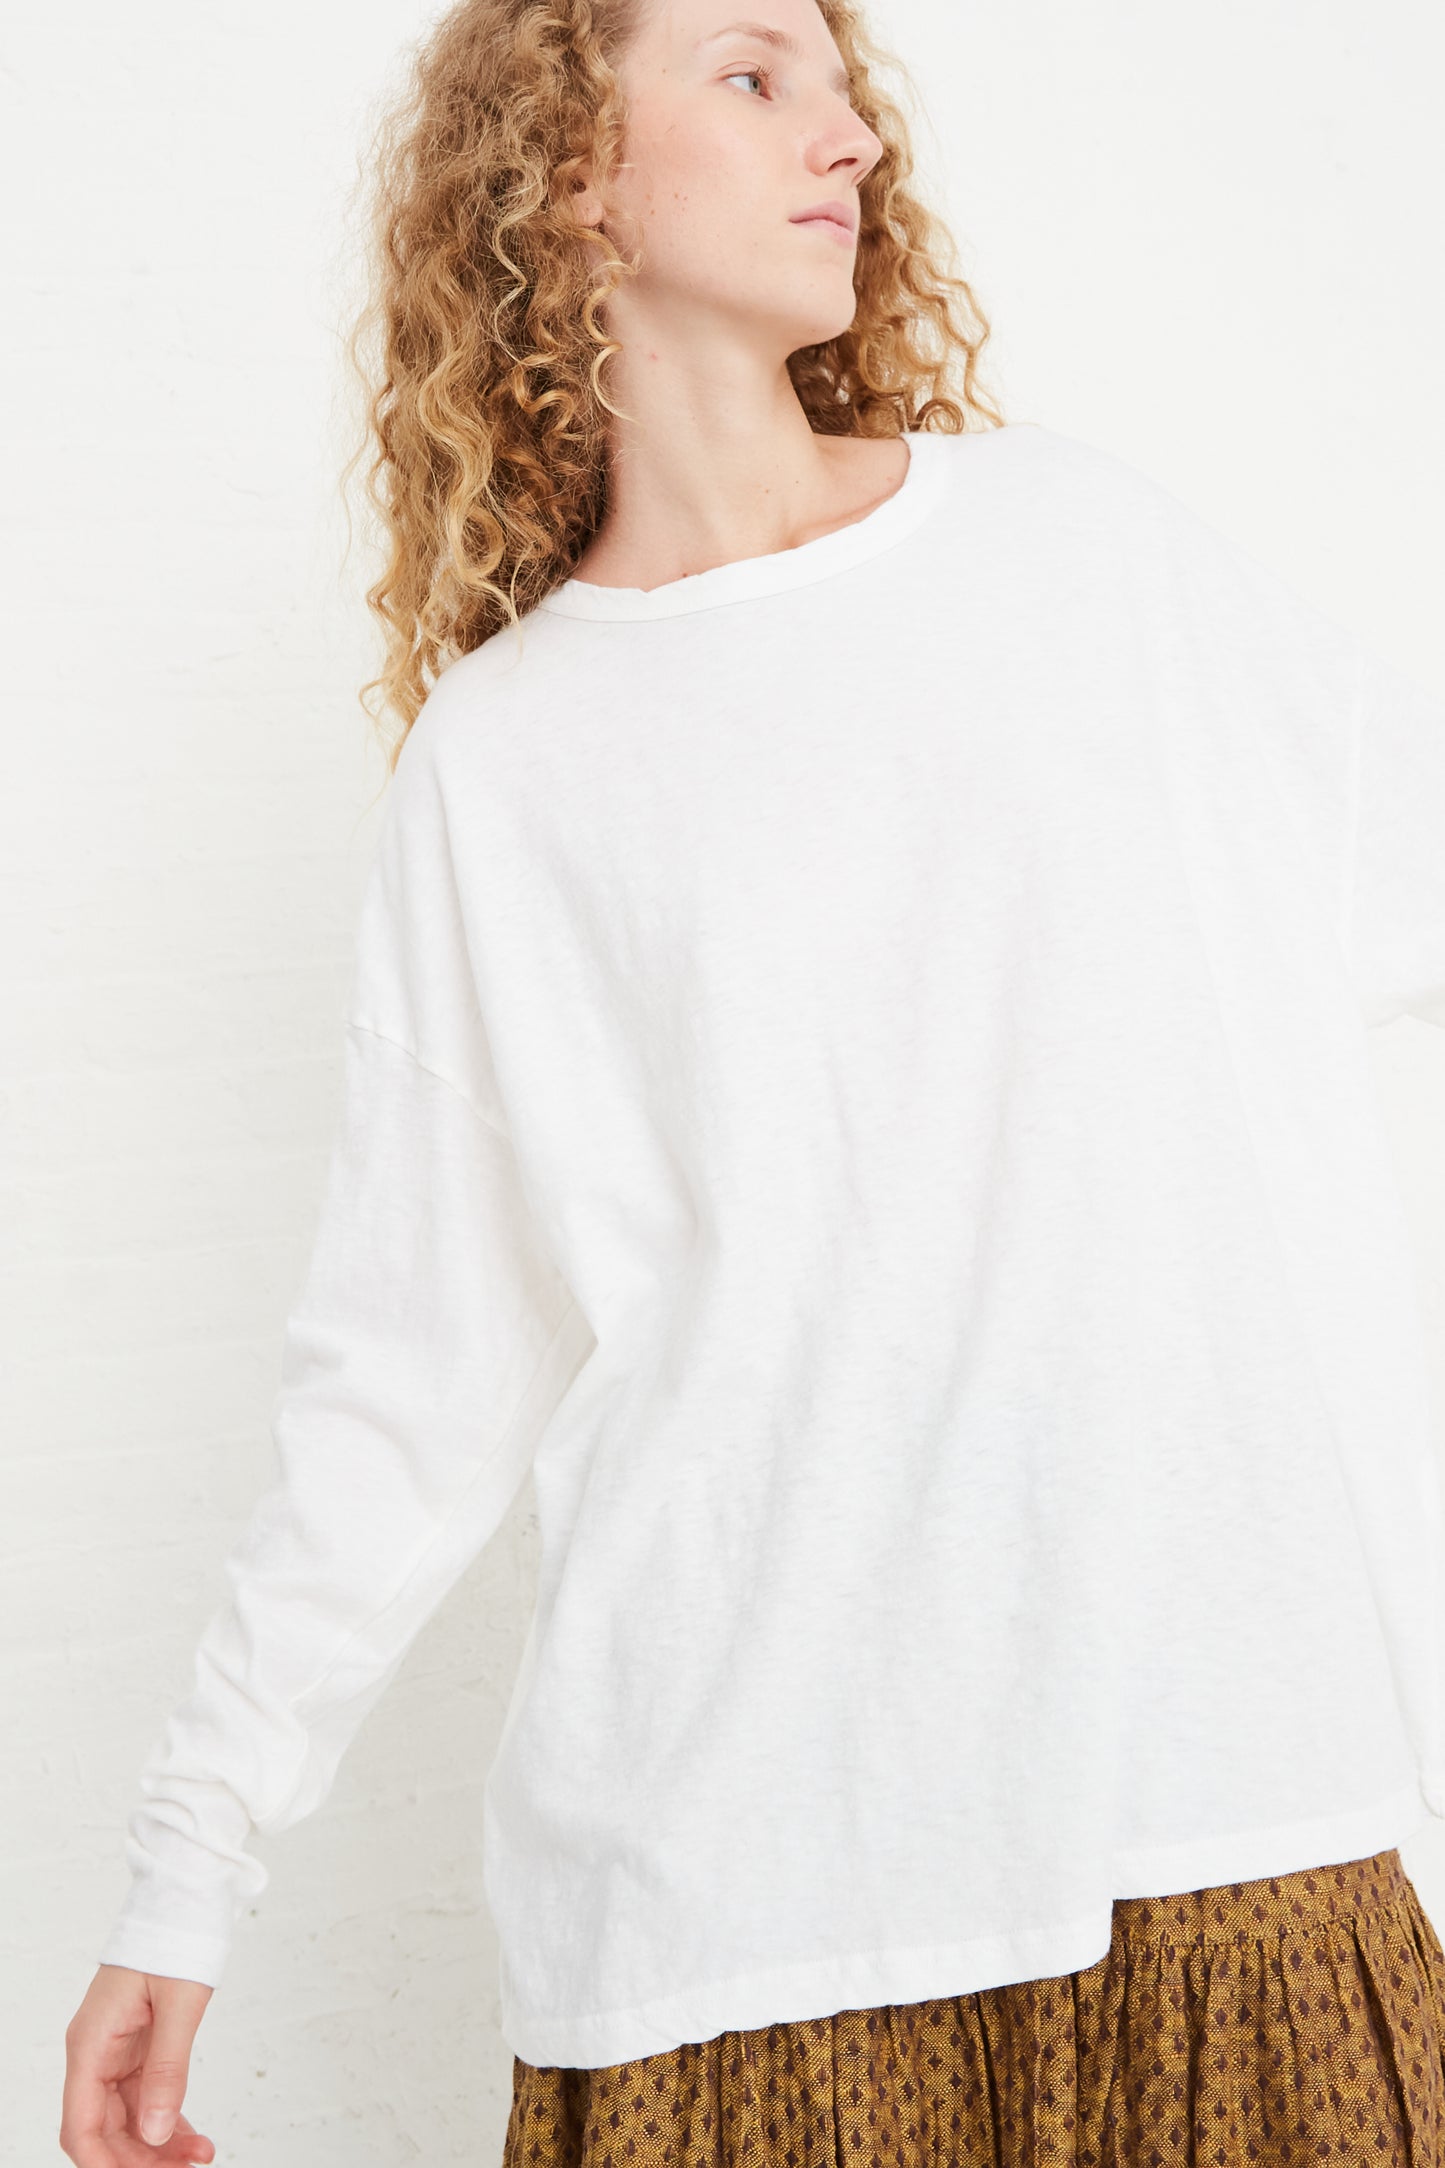 The model is wearing a relaxed fit Cotton Loose Pullover in White made by Ichi Antiquités.